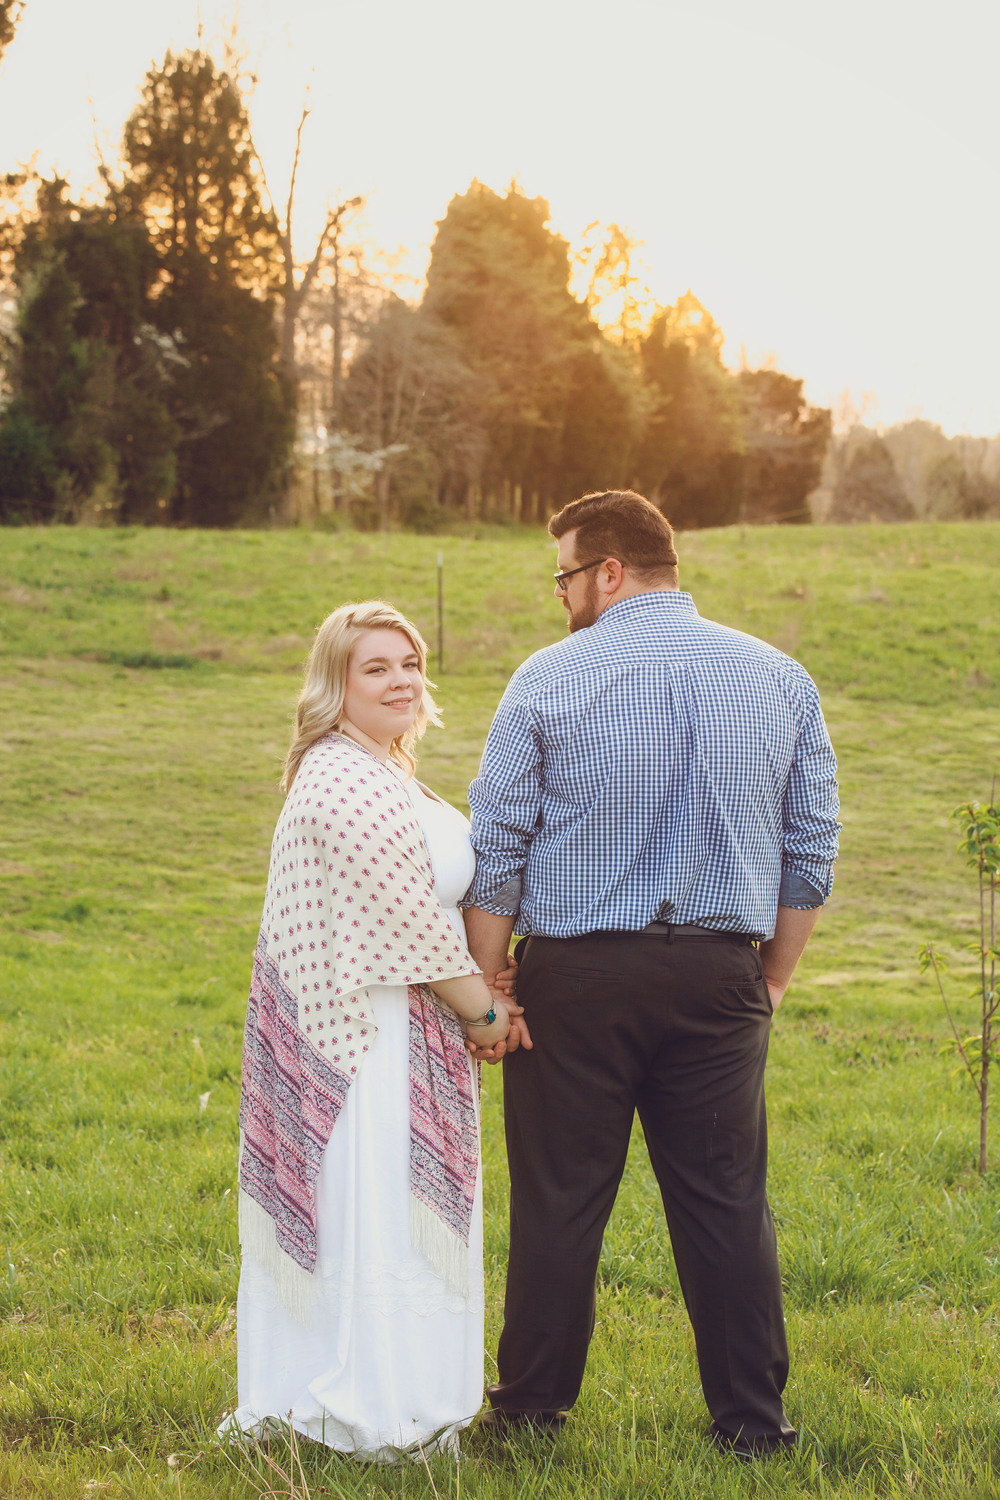   Chas + Tracy's Whimsical Engagement Session | Photography by Two Arrows Photography | Find more at twoarrowsphotos.com  